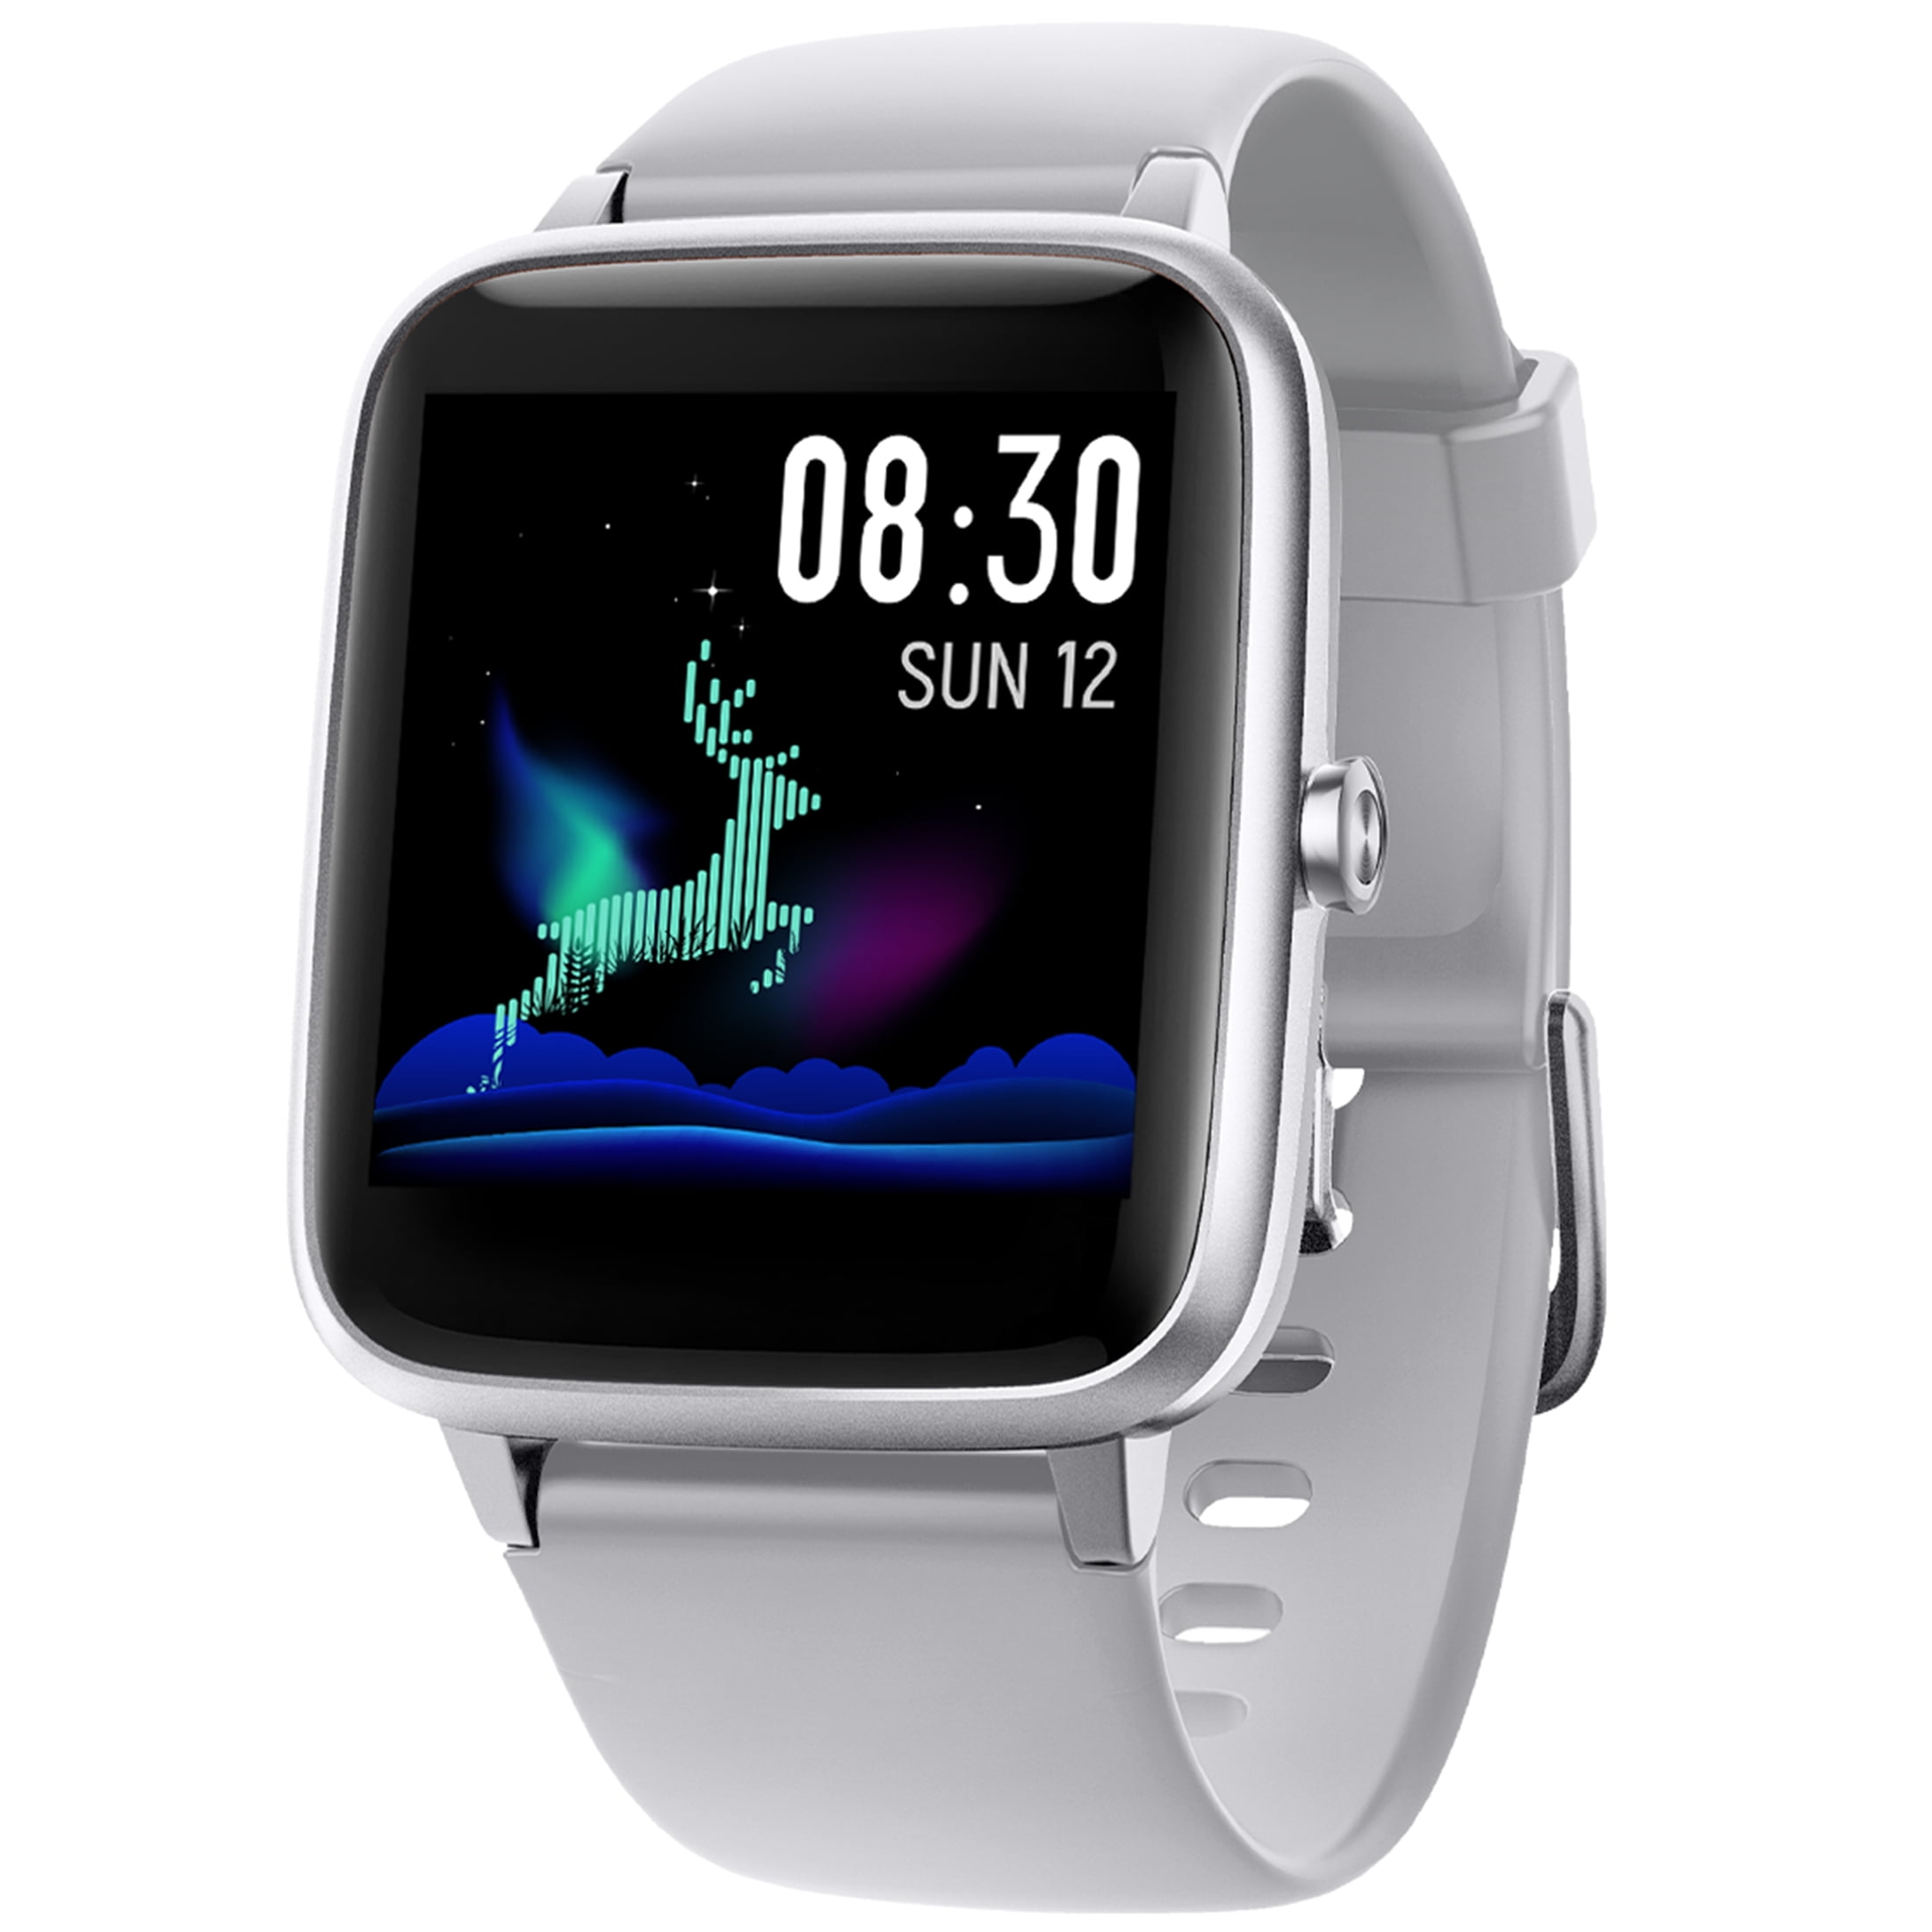 YAMAY YM021 Smart Watch for Android Samsung iPhone, Fitness Tracker ...